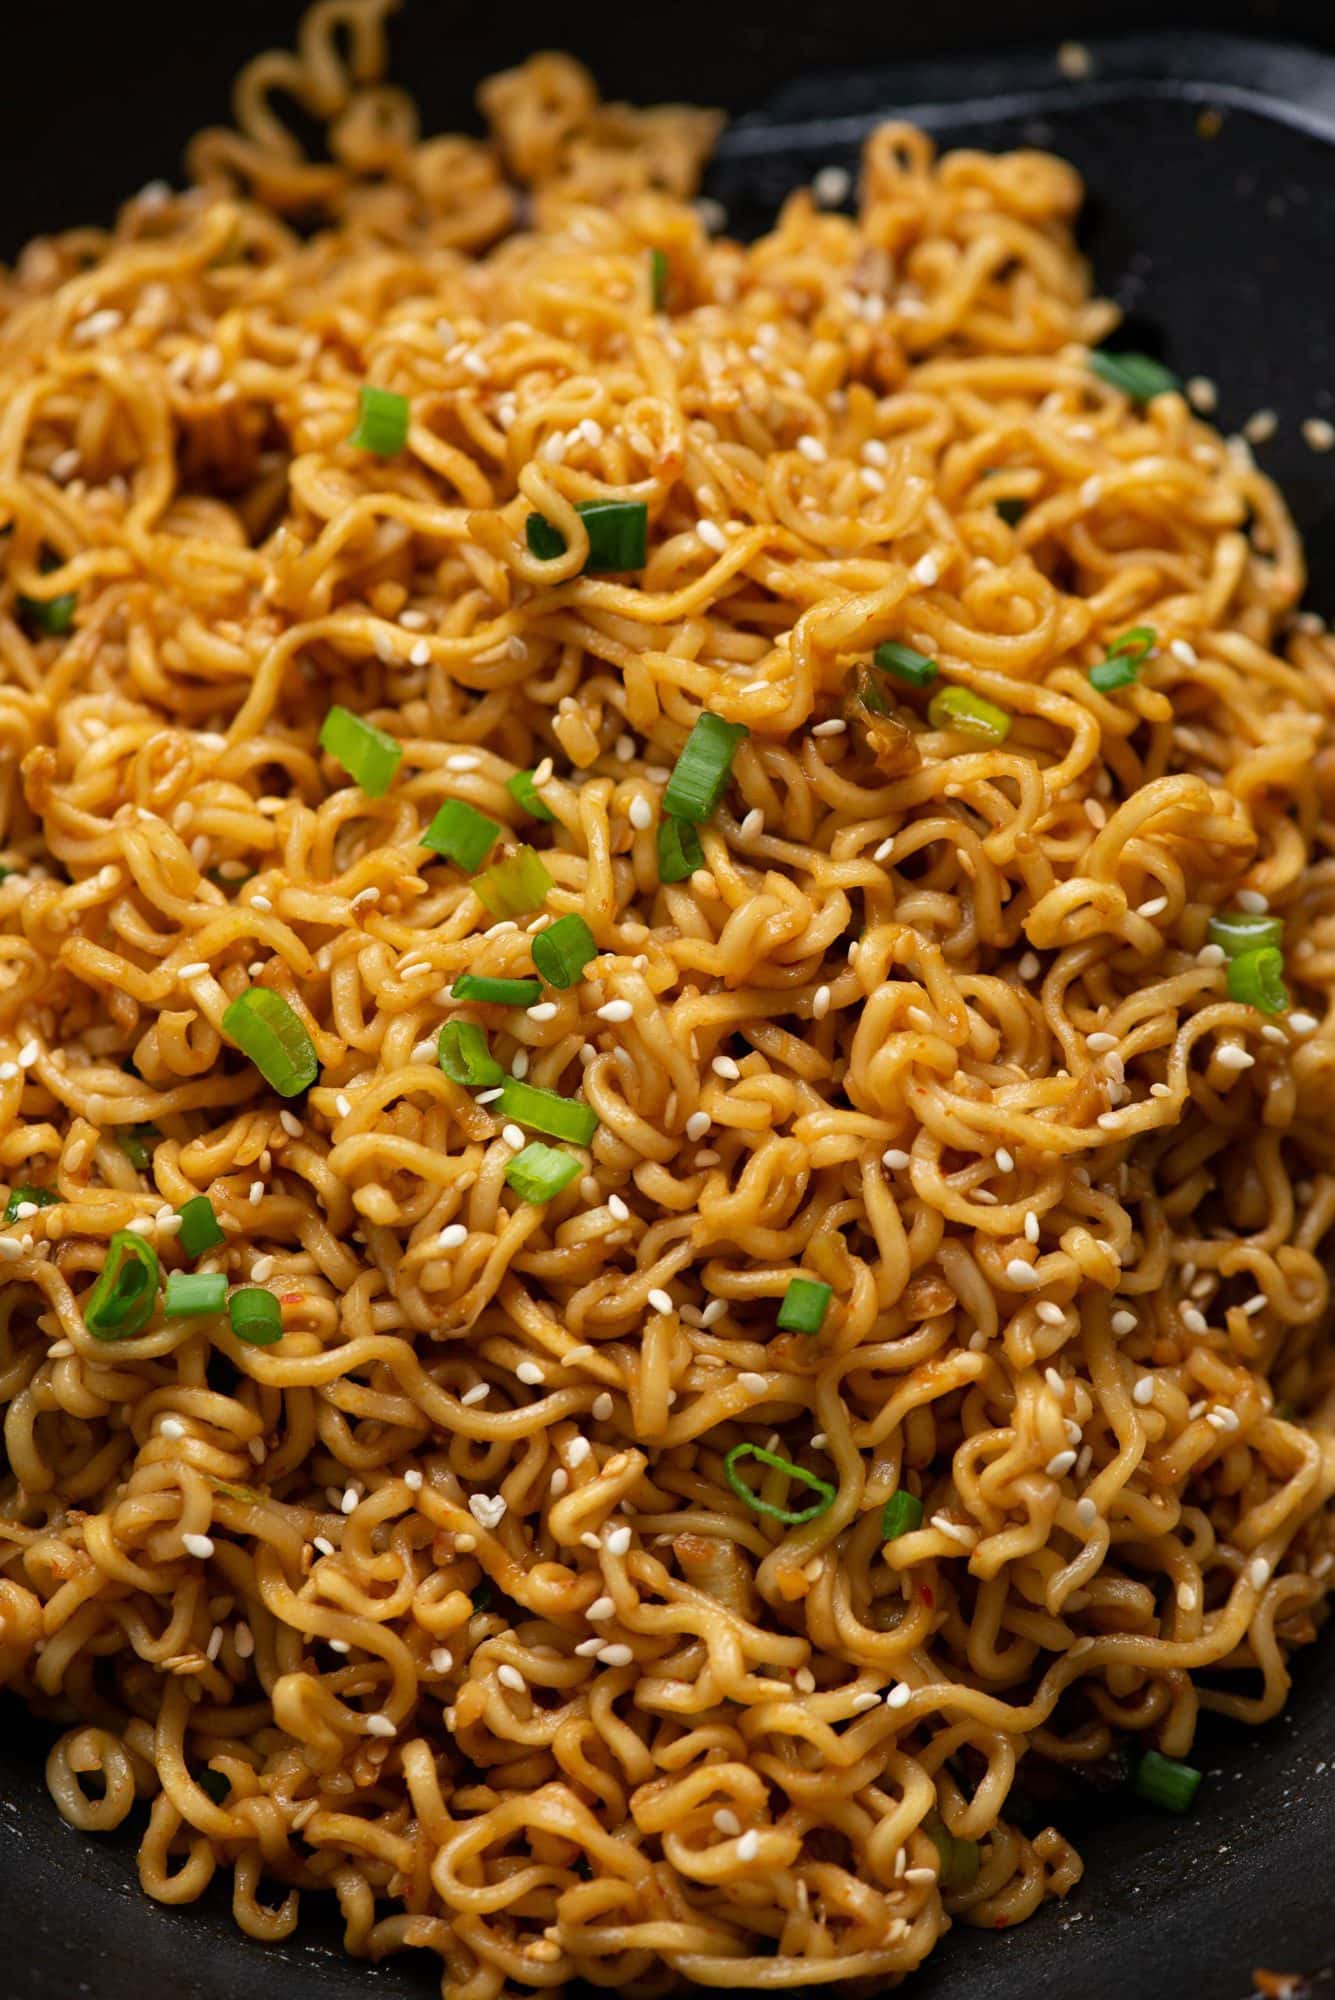 Ramen noodle is tossed in a Sesame, Soy and Garlic sauce. This fast, easy and inexpensive stir fry is loved by kids and adults equally. 